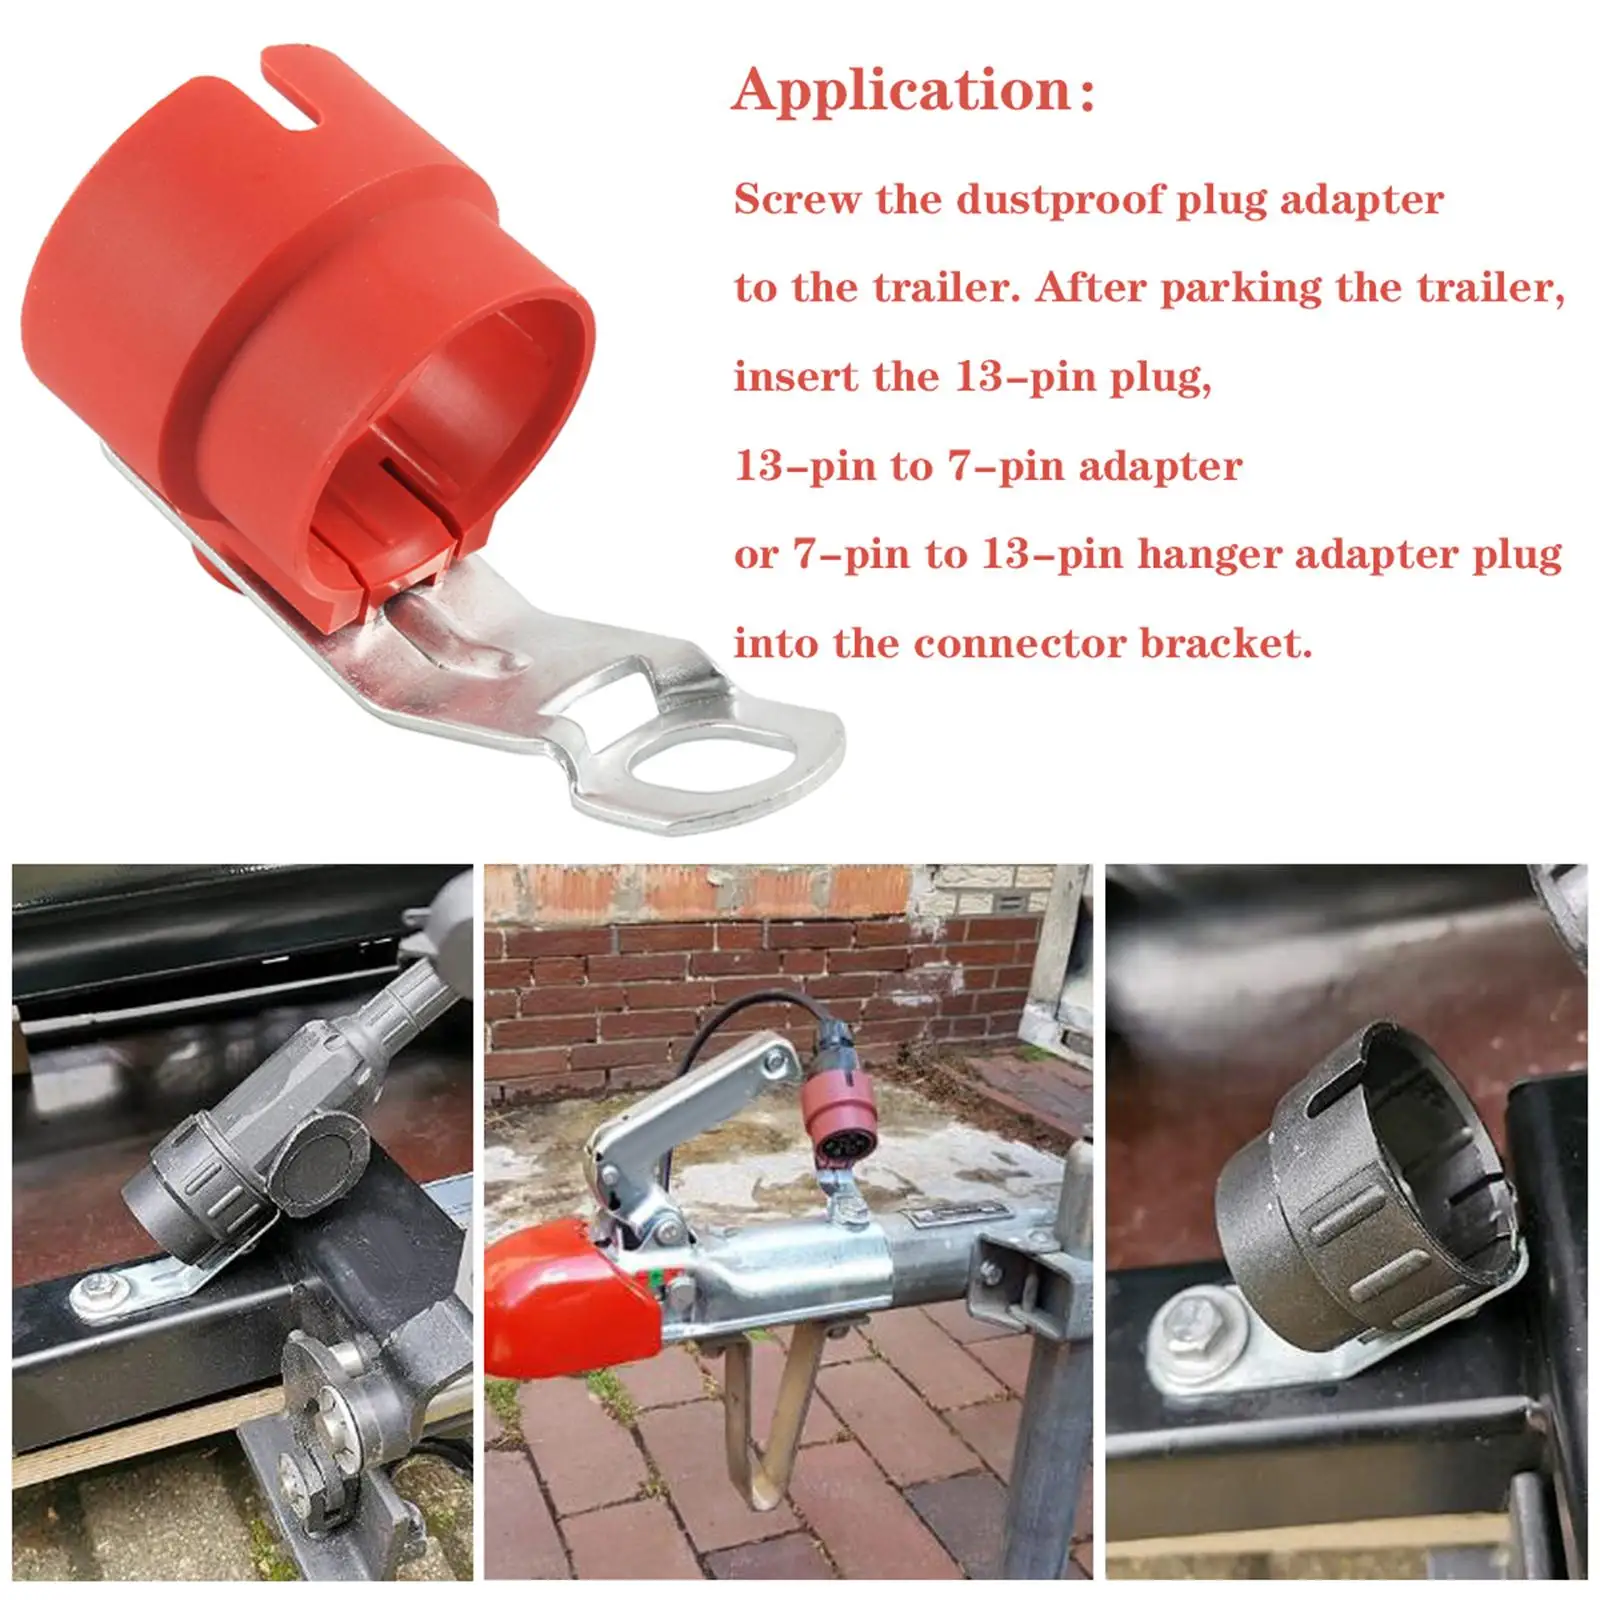 Red Trailer Plug Adapter Holder 13 Pin 7 Pin Spare Parts Durable Accessory